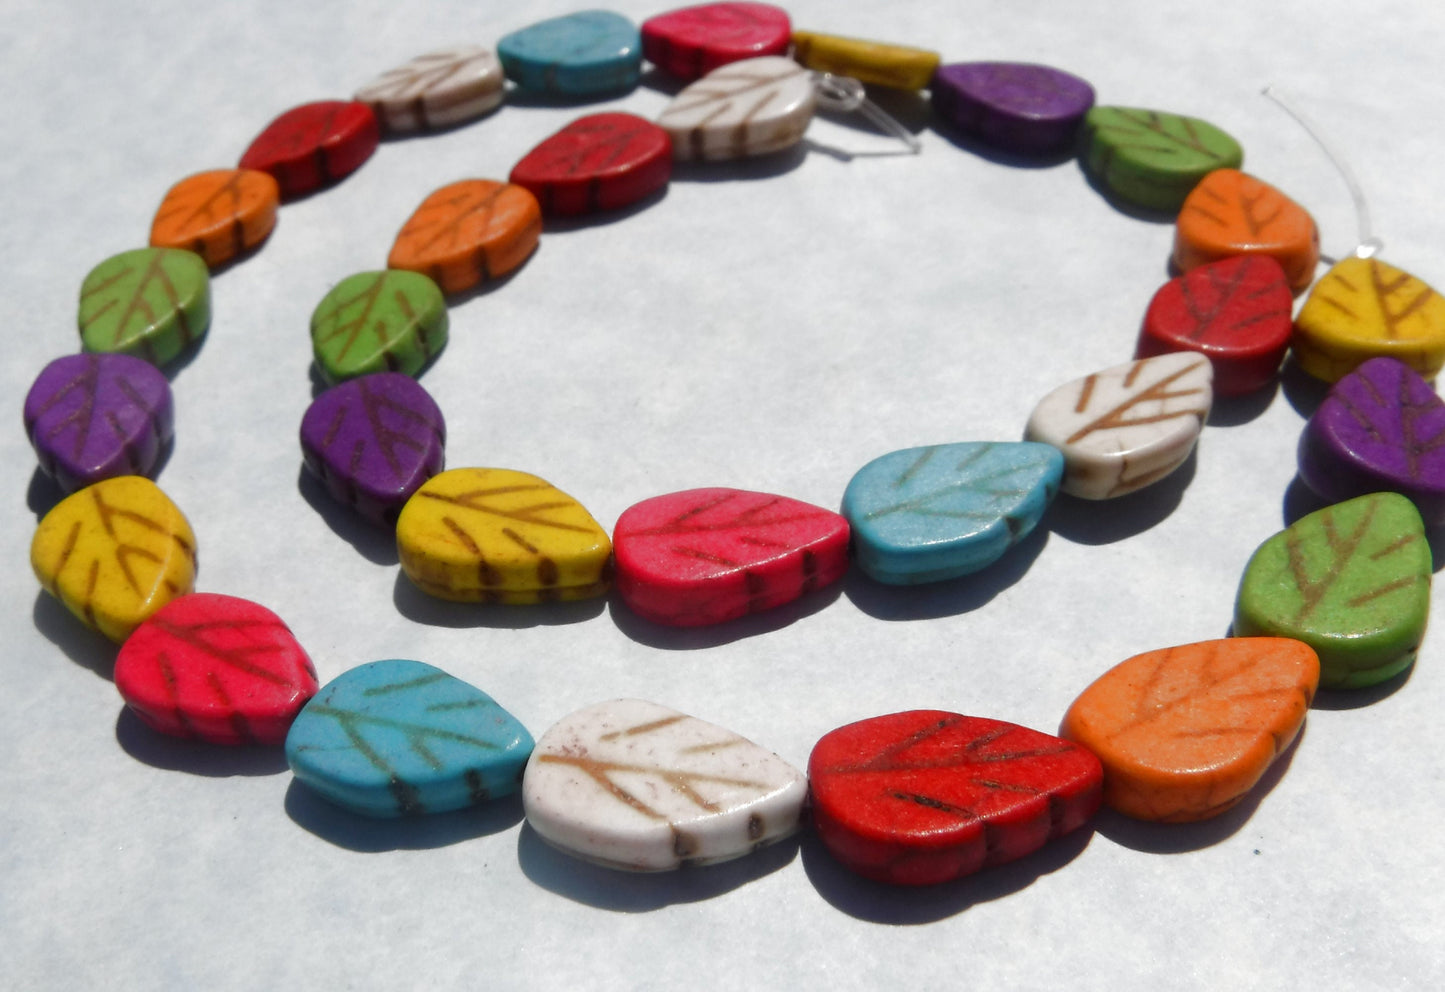 Colorful Leaf Stone Beads - 9mmx 13mm - Choose Half Strand or Full Strand - Use for Mosaics